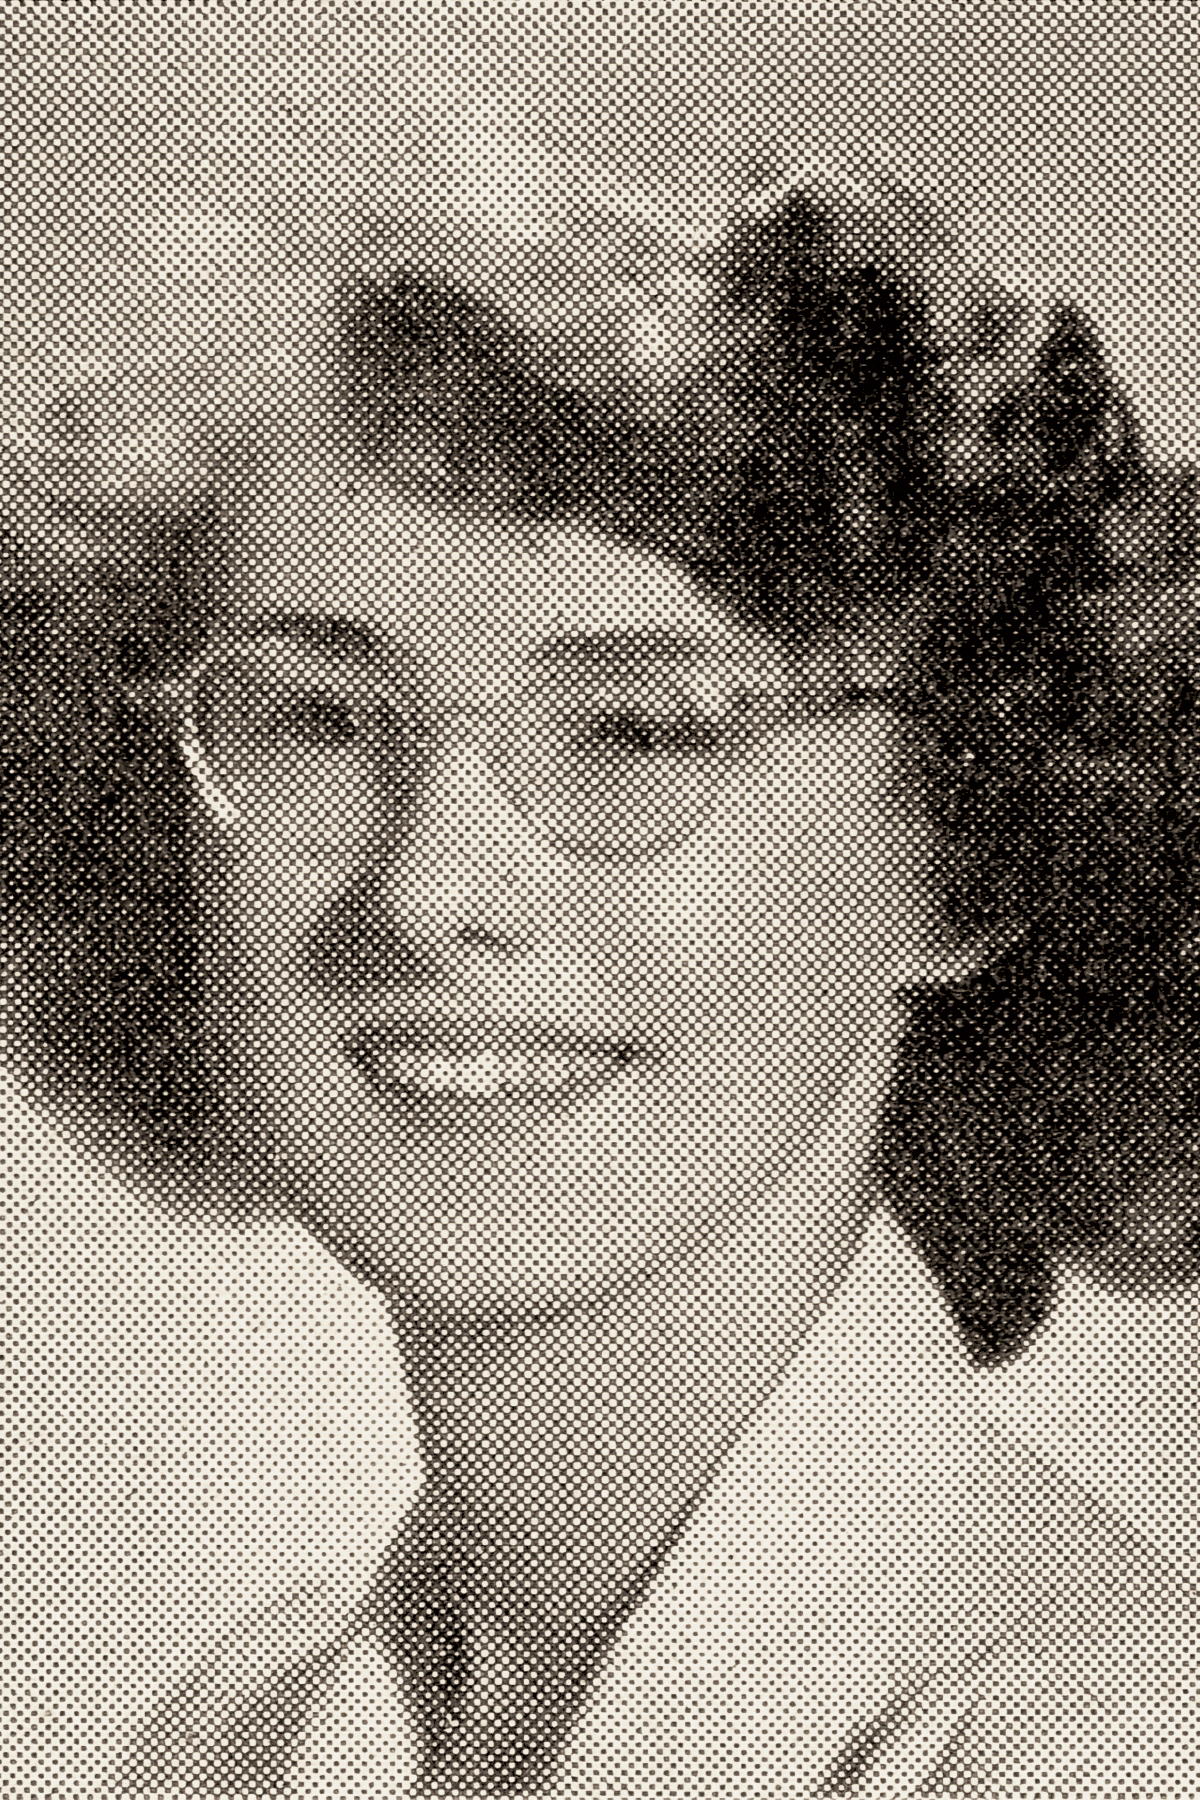 Janet Hartley, B.S. ’49, bacteriology, in her 1949 senior yearbook photo.